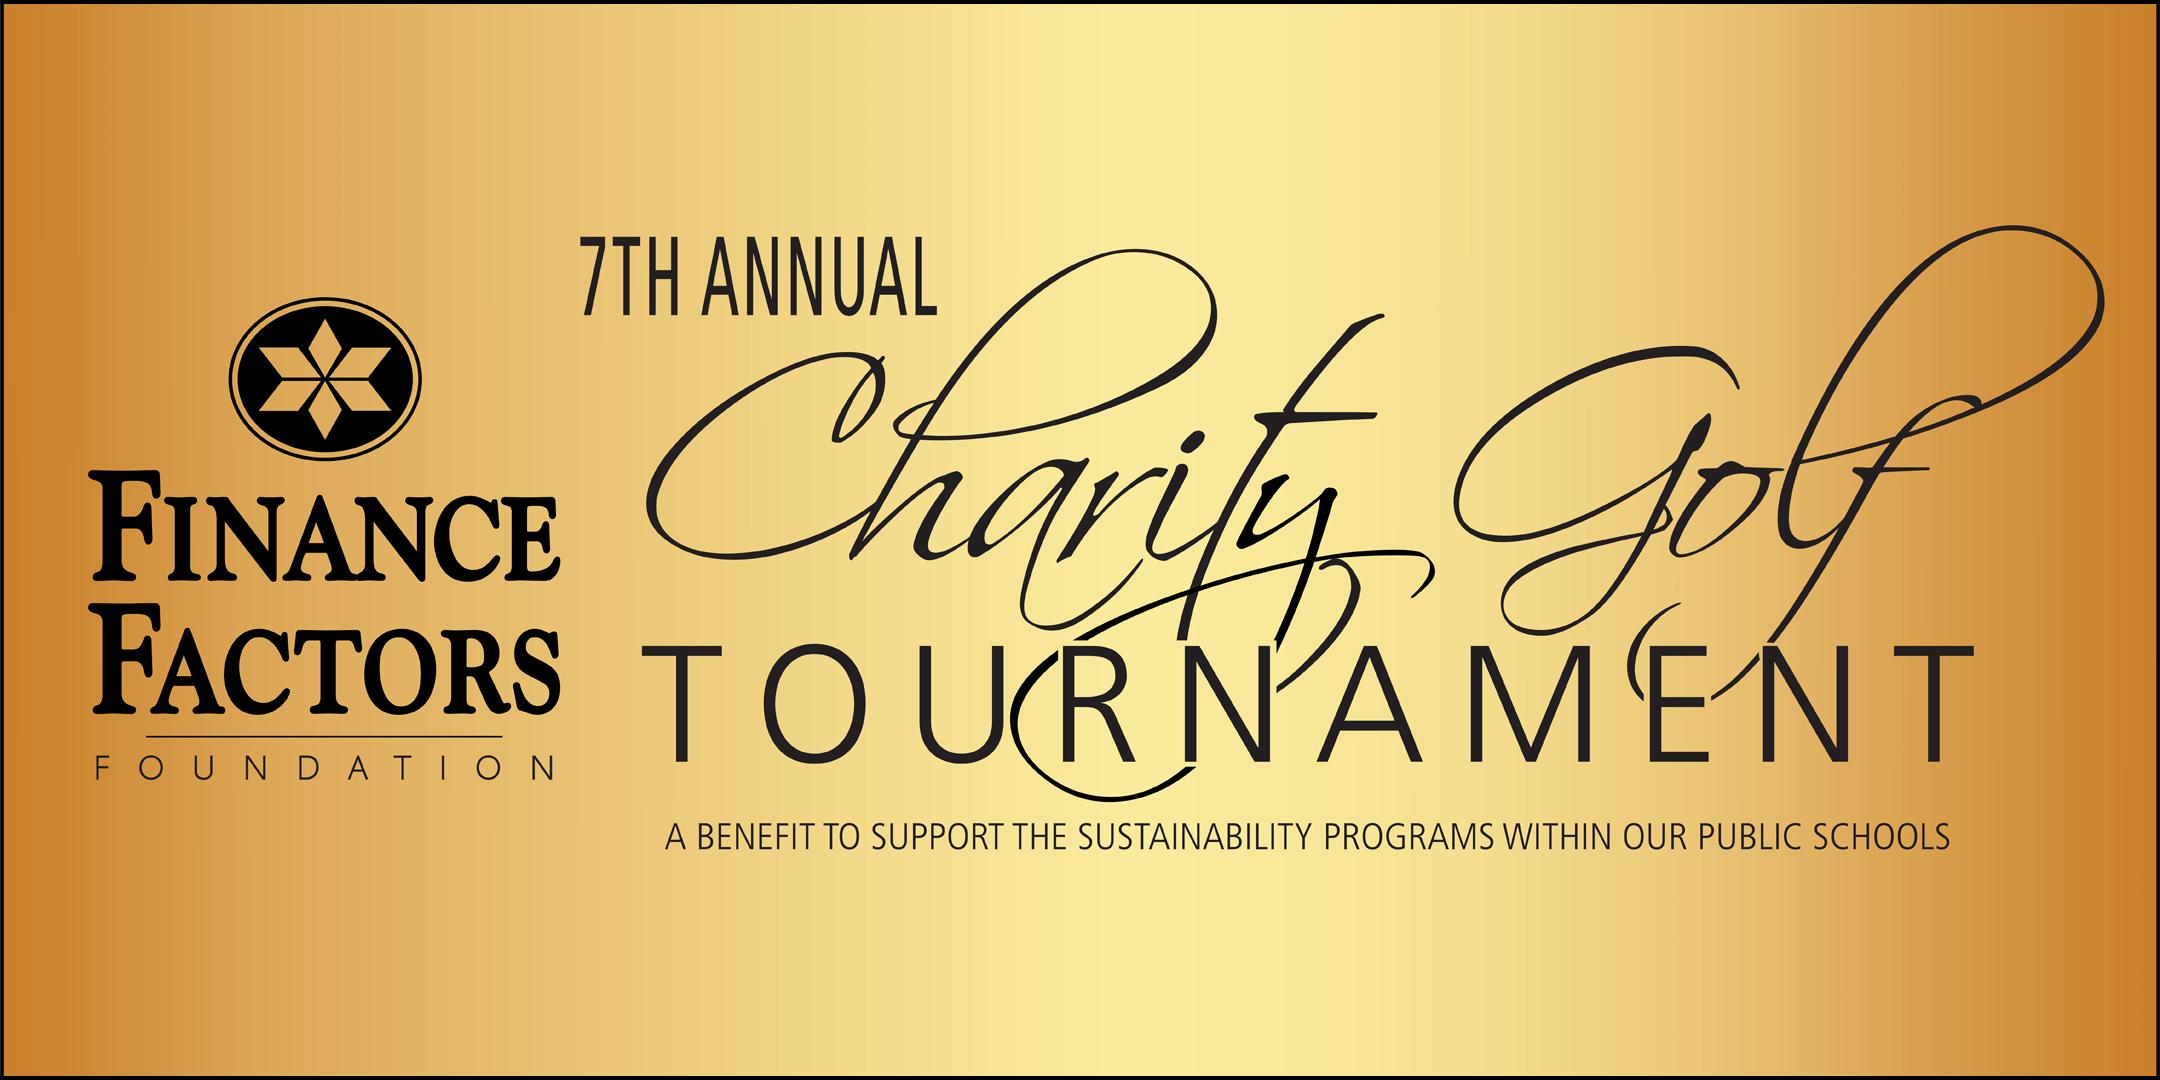 Finance Factors Foundation 7th Annual Charity Golf Tournament